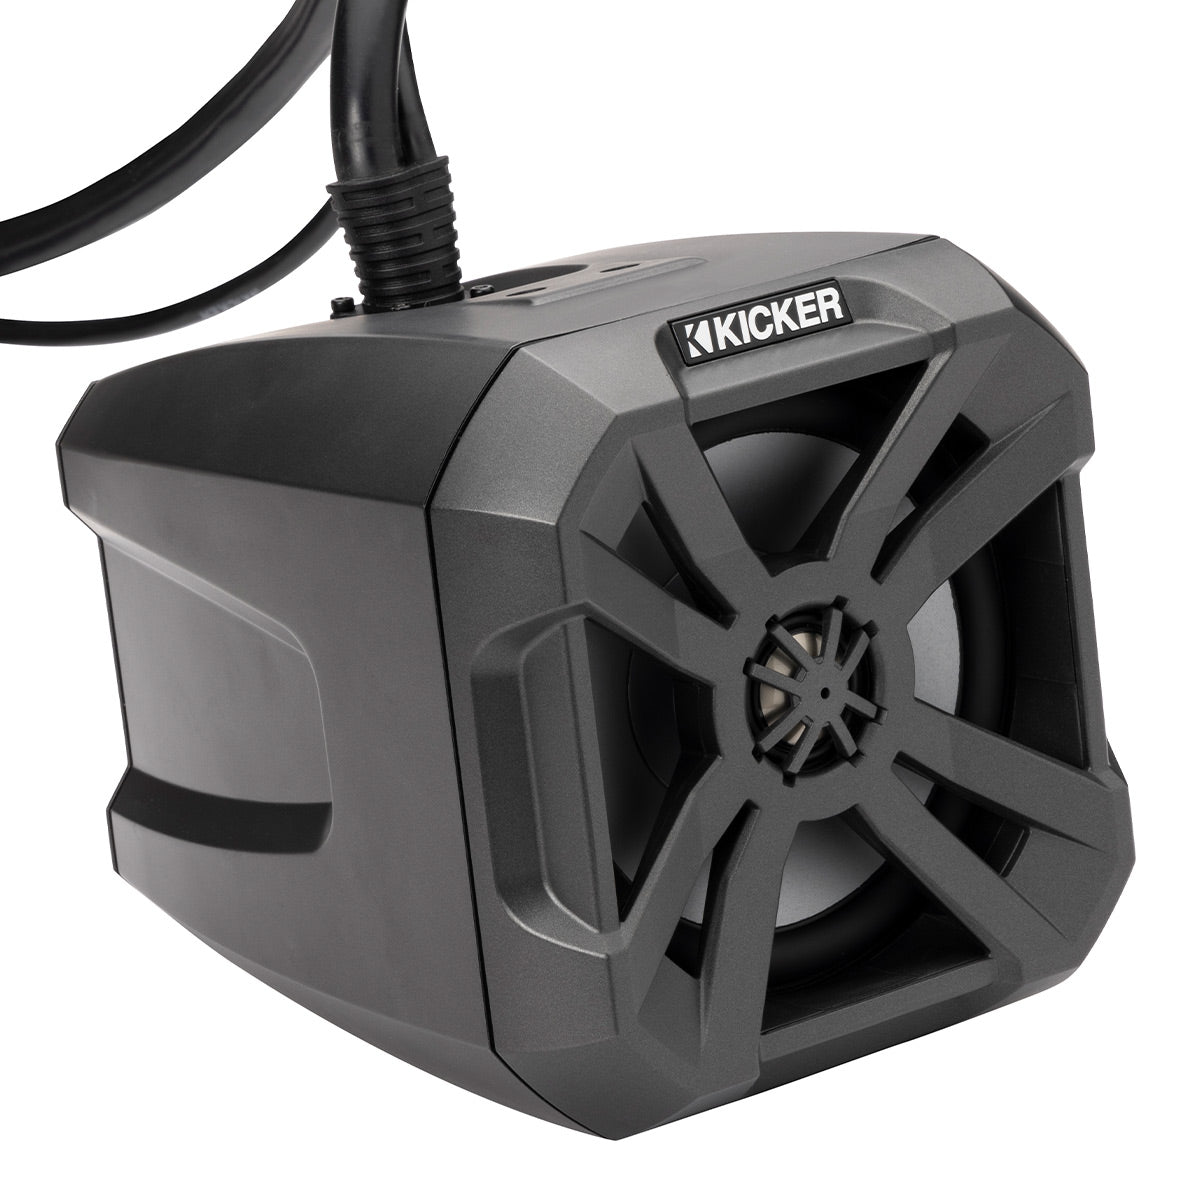 Kicker 48BTCAN65 PowerCan 6.5" Powered Bluetooth Speakers with IP66 Rating, LED Lighting, and Wired Remote - Pair